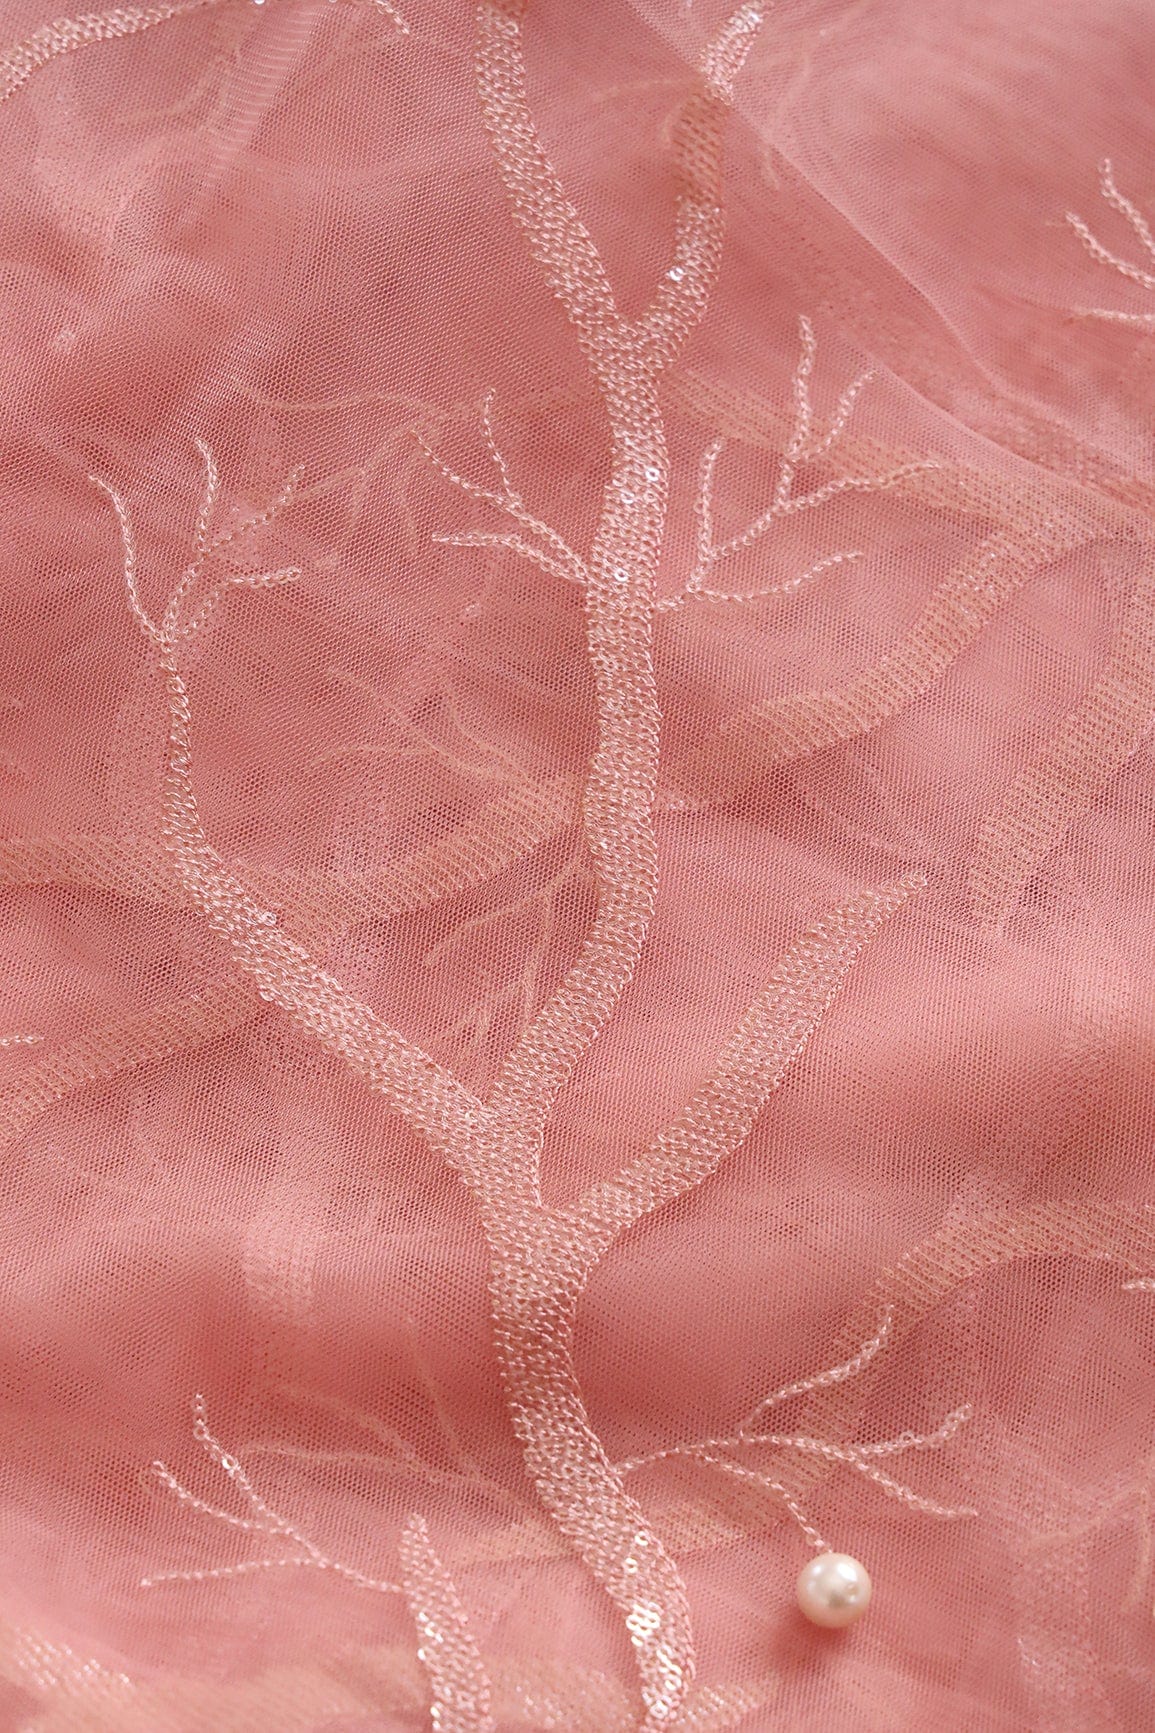 doeraa Embroidery Fabrics Pink Thread With Sequins Abstract Embroidery Work On Pink Soft Net Fabric